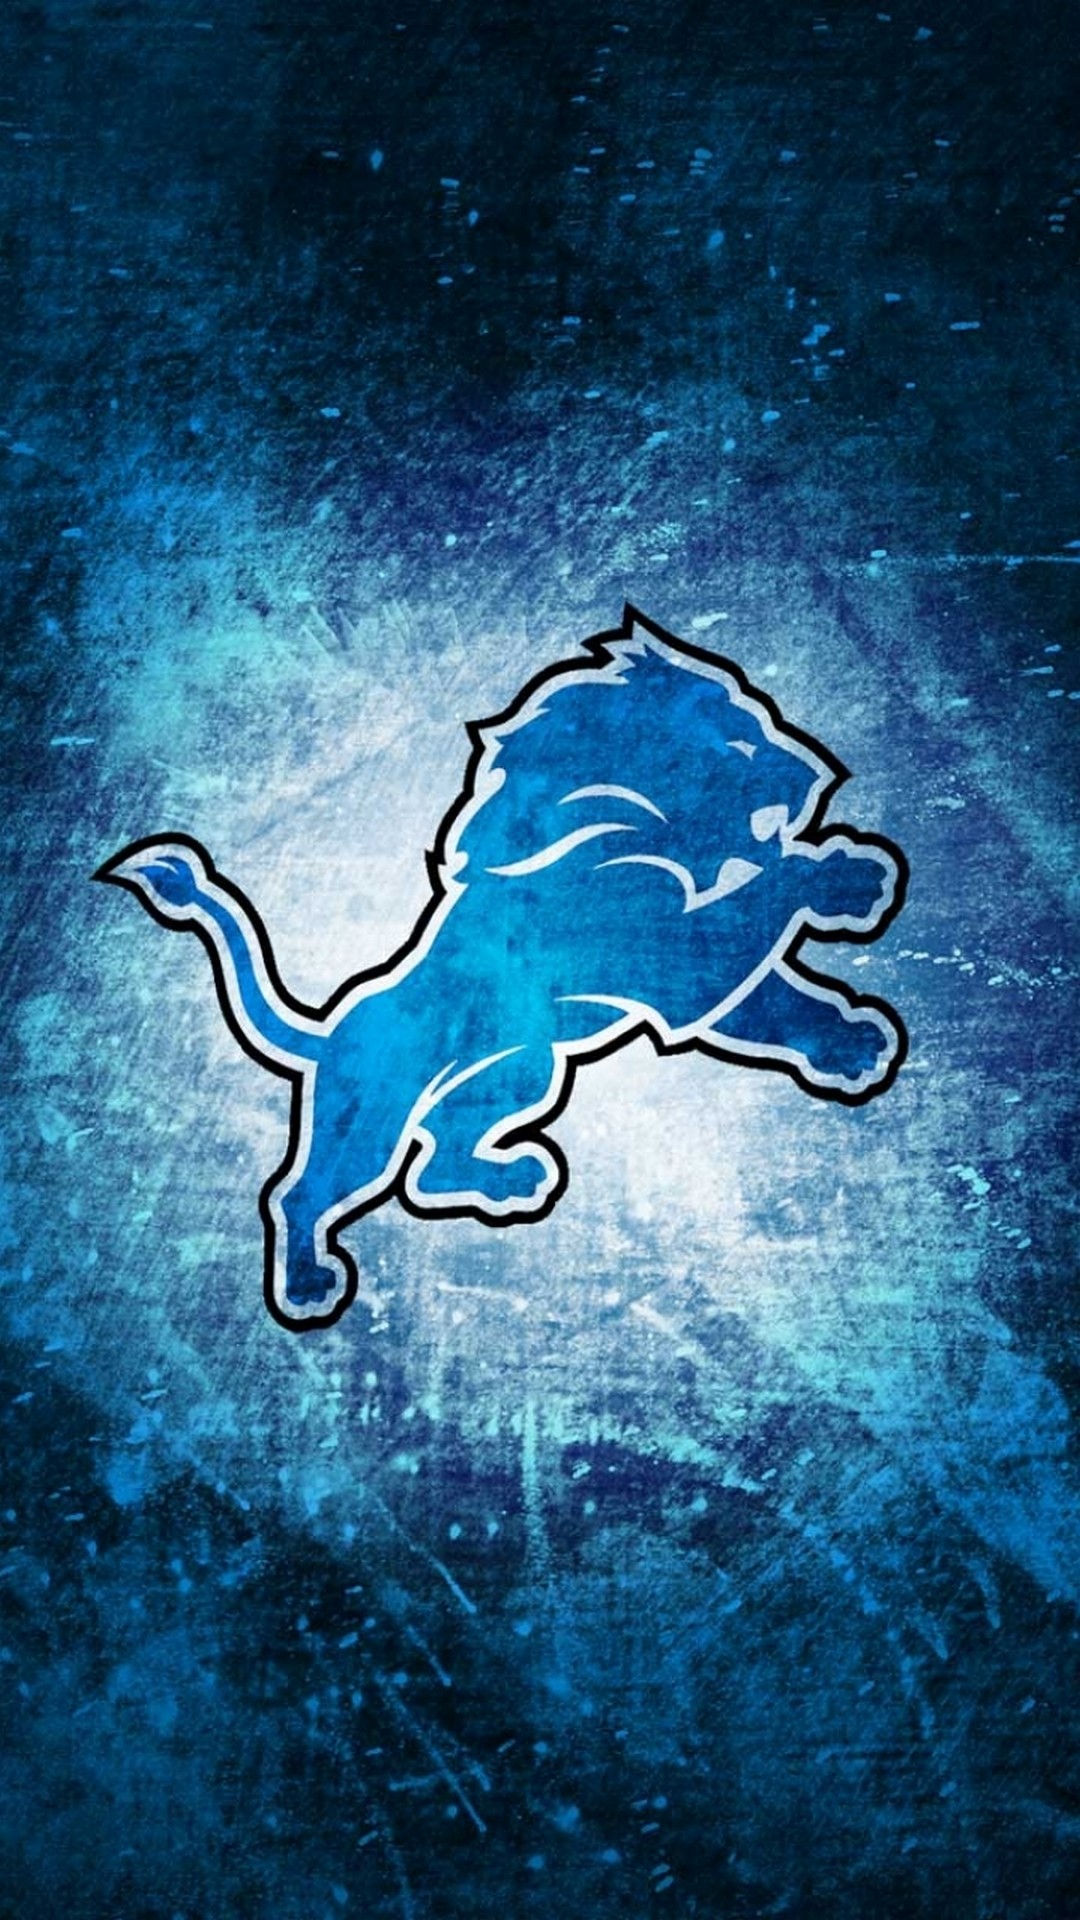 Detroit Lions iPhone Wallpaper Tumblr with high-resolution 1080x1920 pixel. Download and set as wallpaper for Apple iPhone X, XS Max, XR, 8, 7, 6, SE, iPad, Android